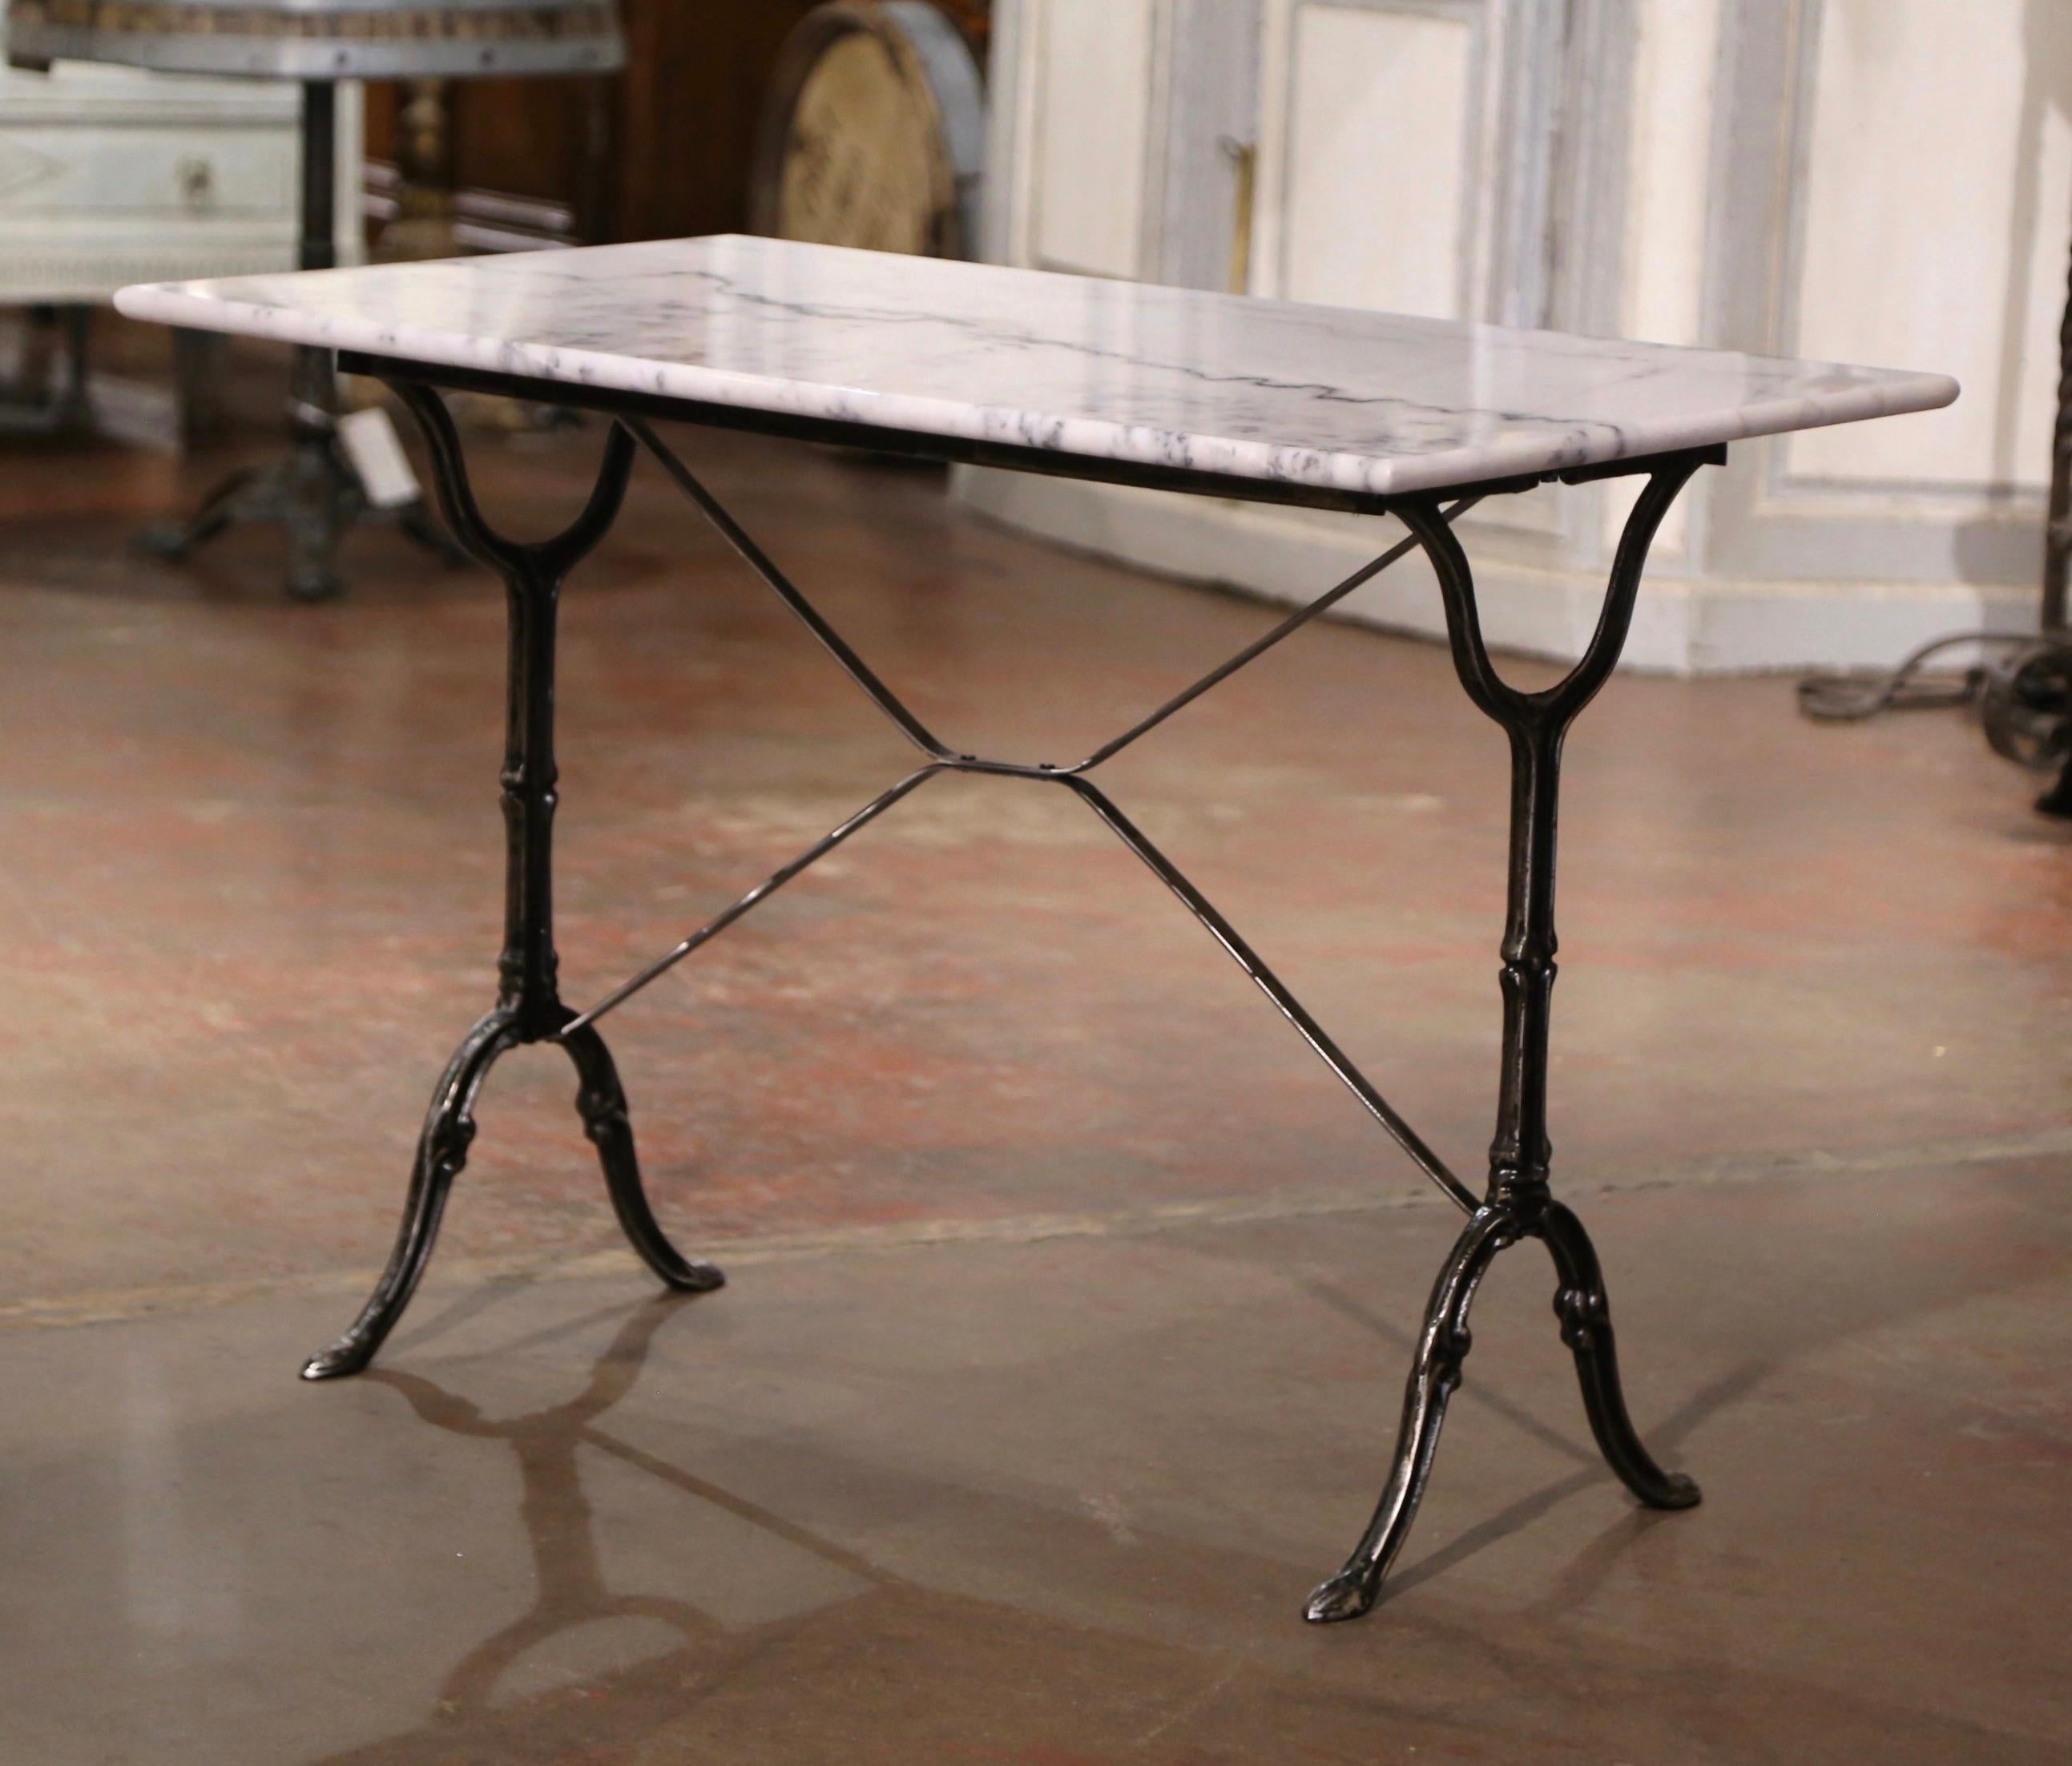 Crafted in France circa 1960, the antique cast iron table sits on a trestle base with elegant scroll legs ending with hoof feet, and joined together with a double decorative stretcher. The piece is dressed with the original rectangular white and